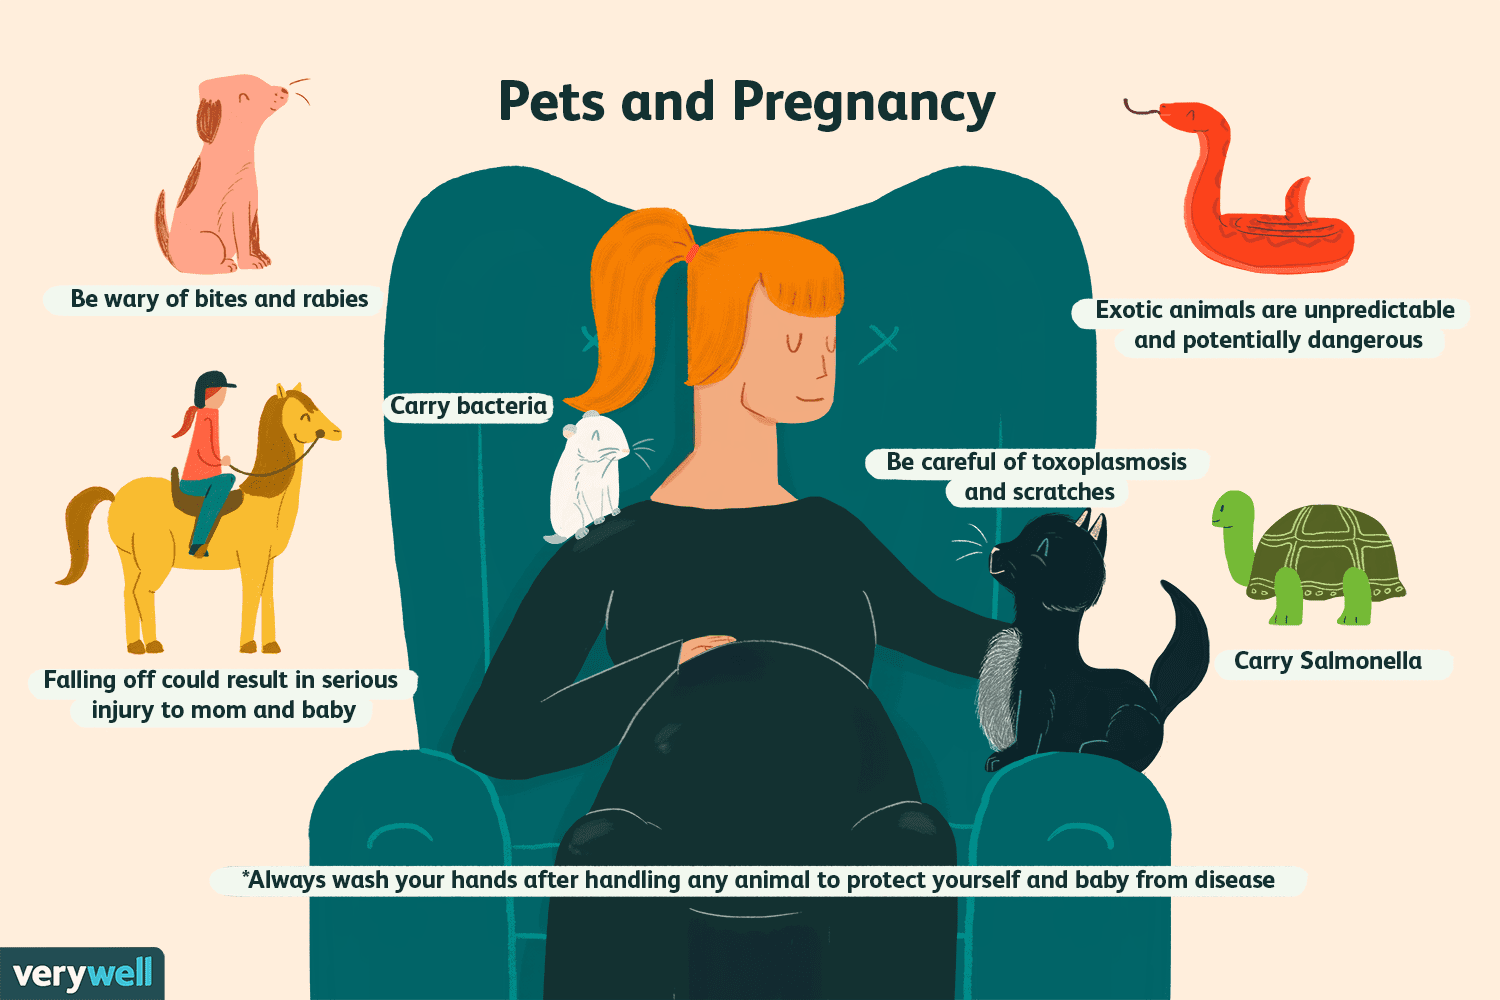 What is the scientific name for a female animal's pregnancy?